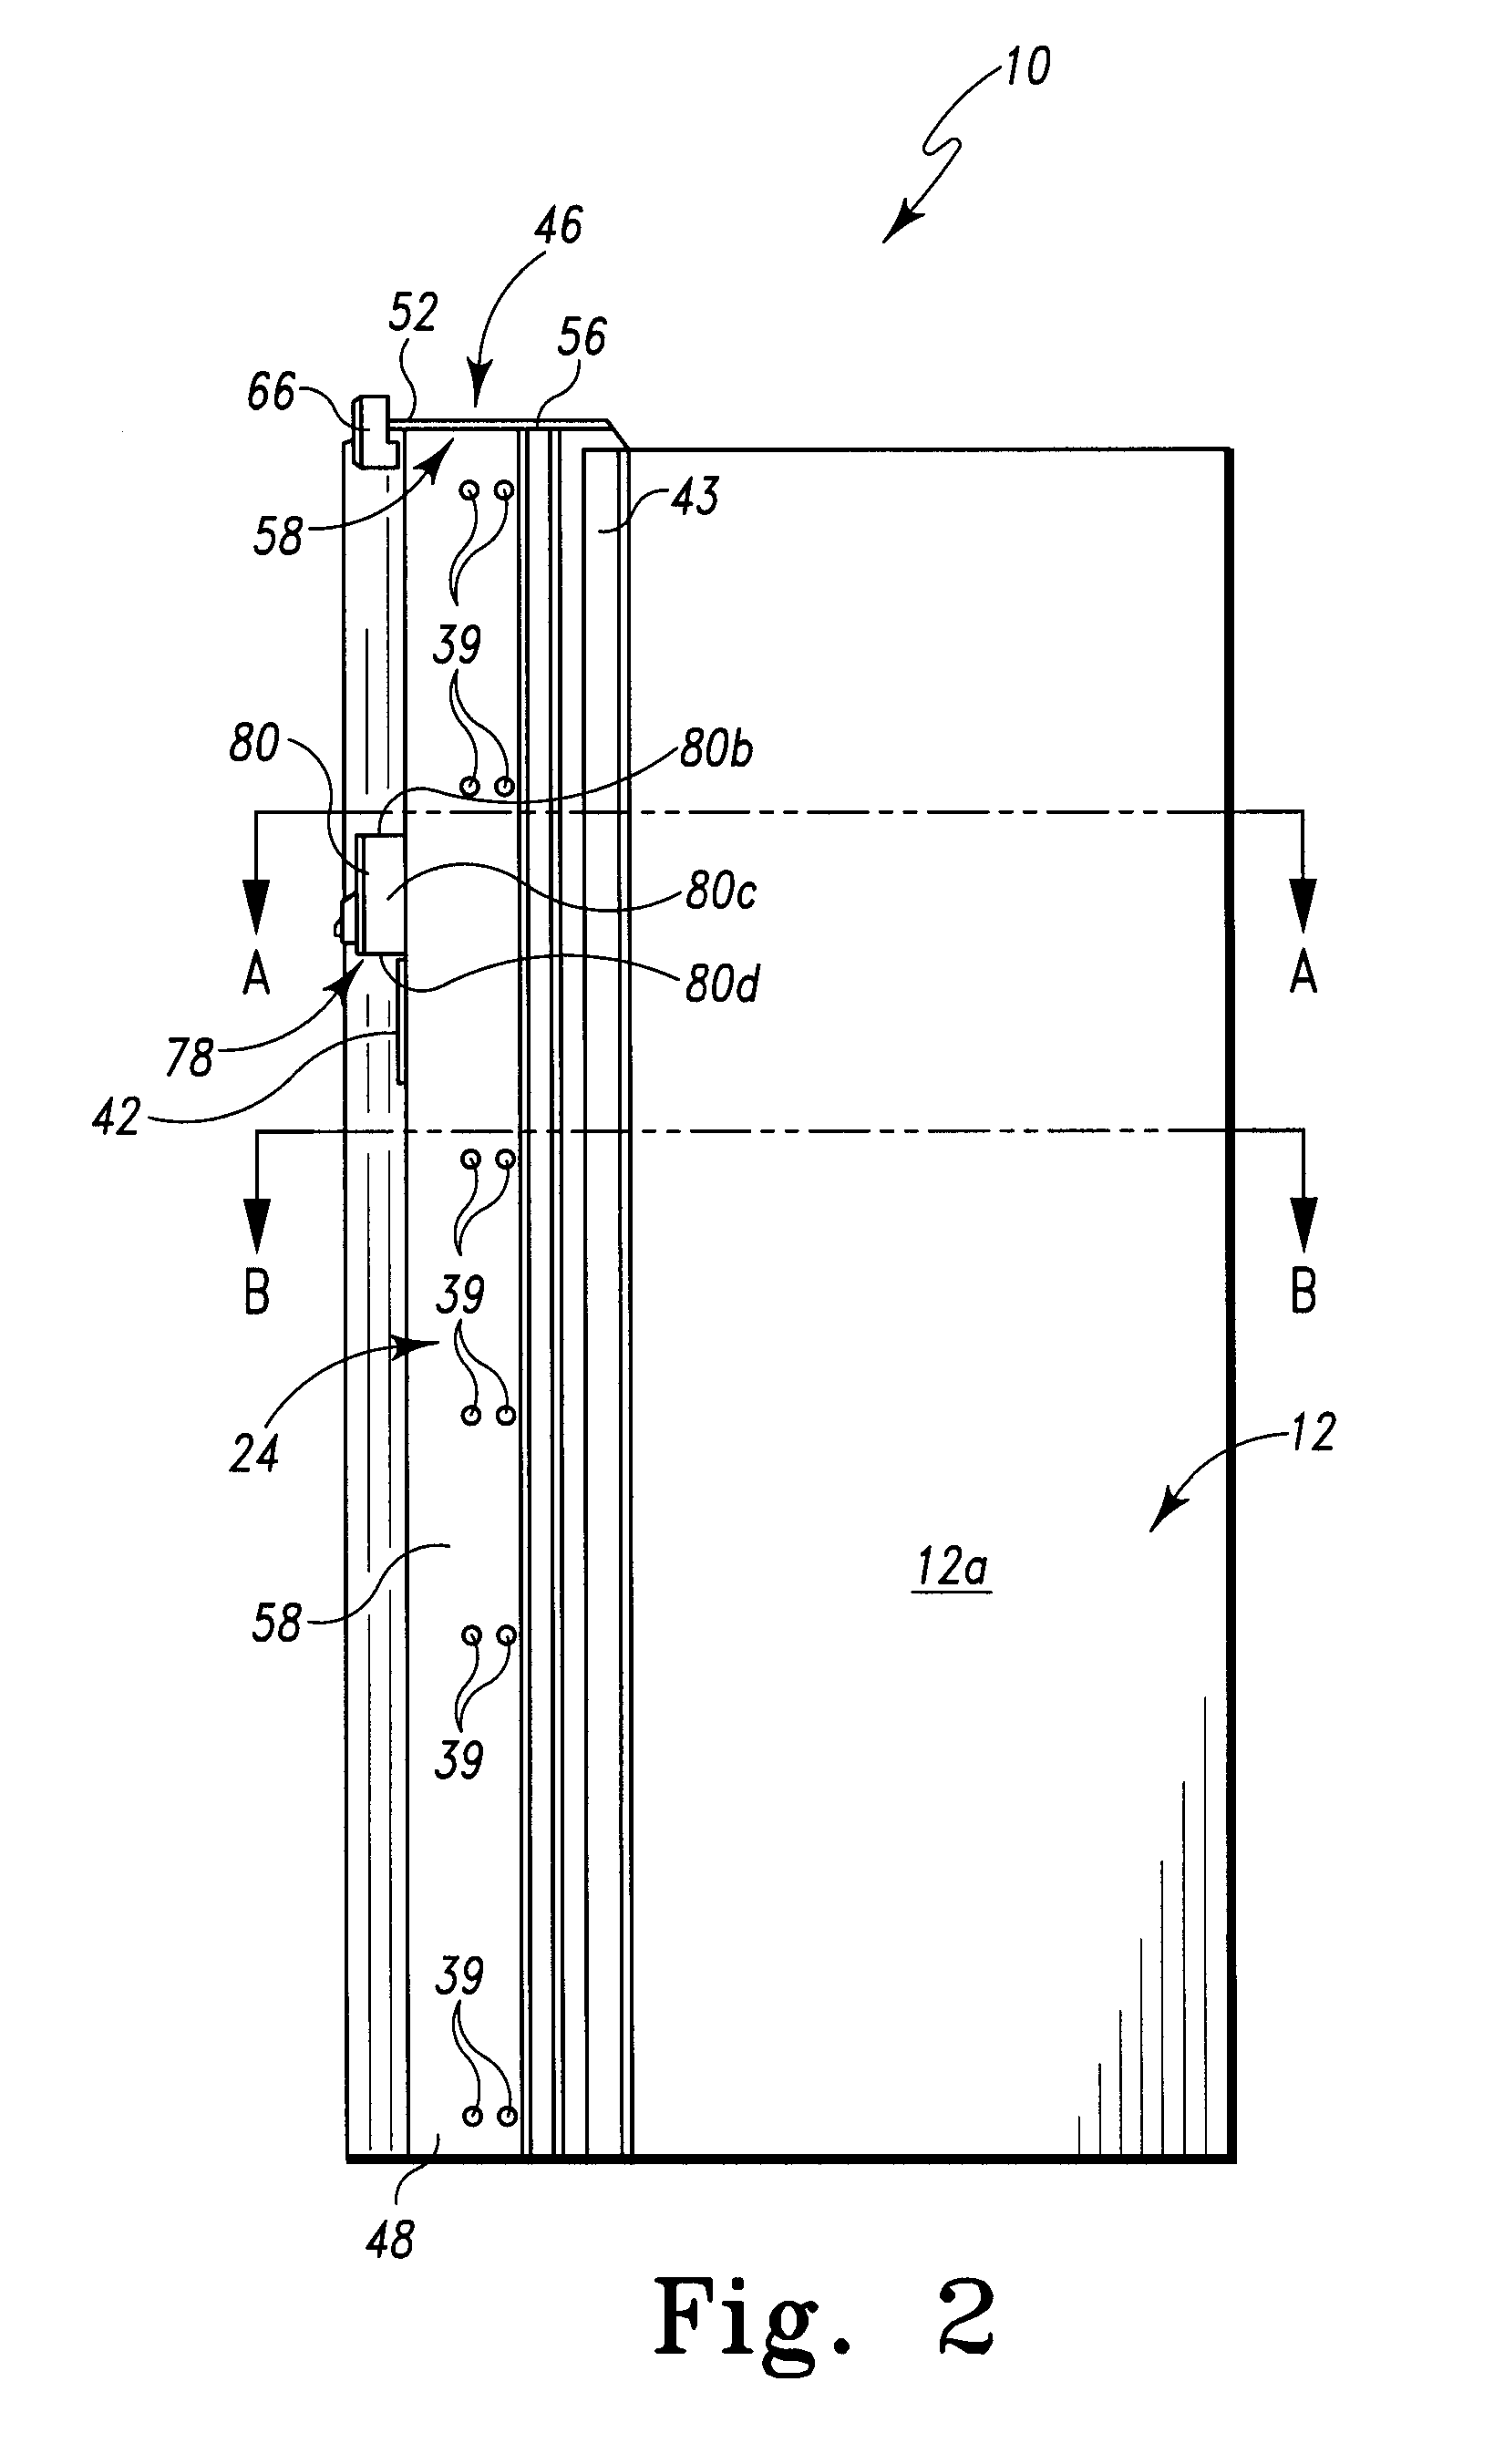 Apparatus and method for reducing loss in a vending machine due to forced entry and vandalism